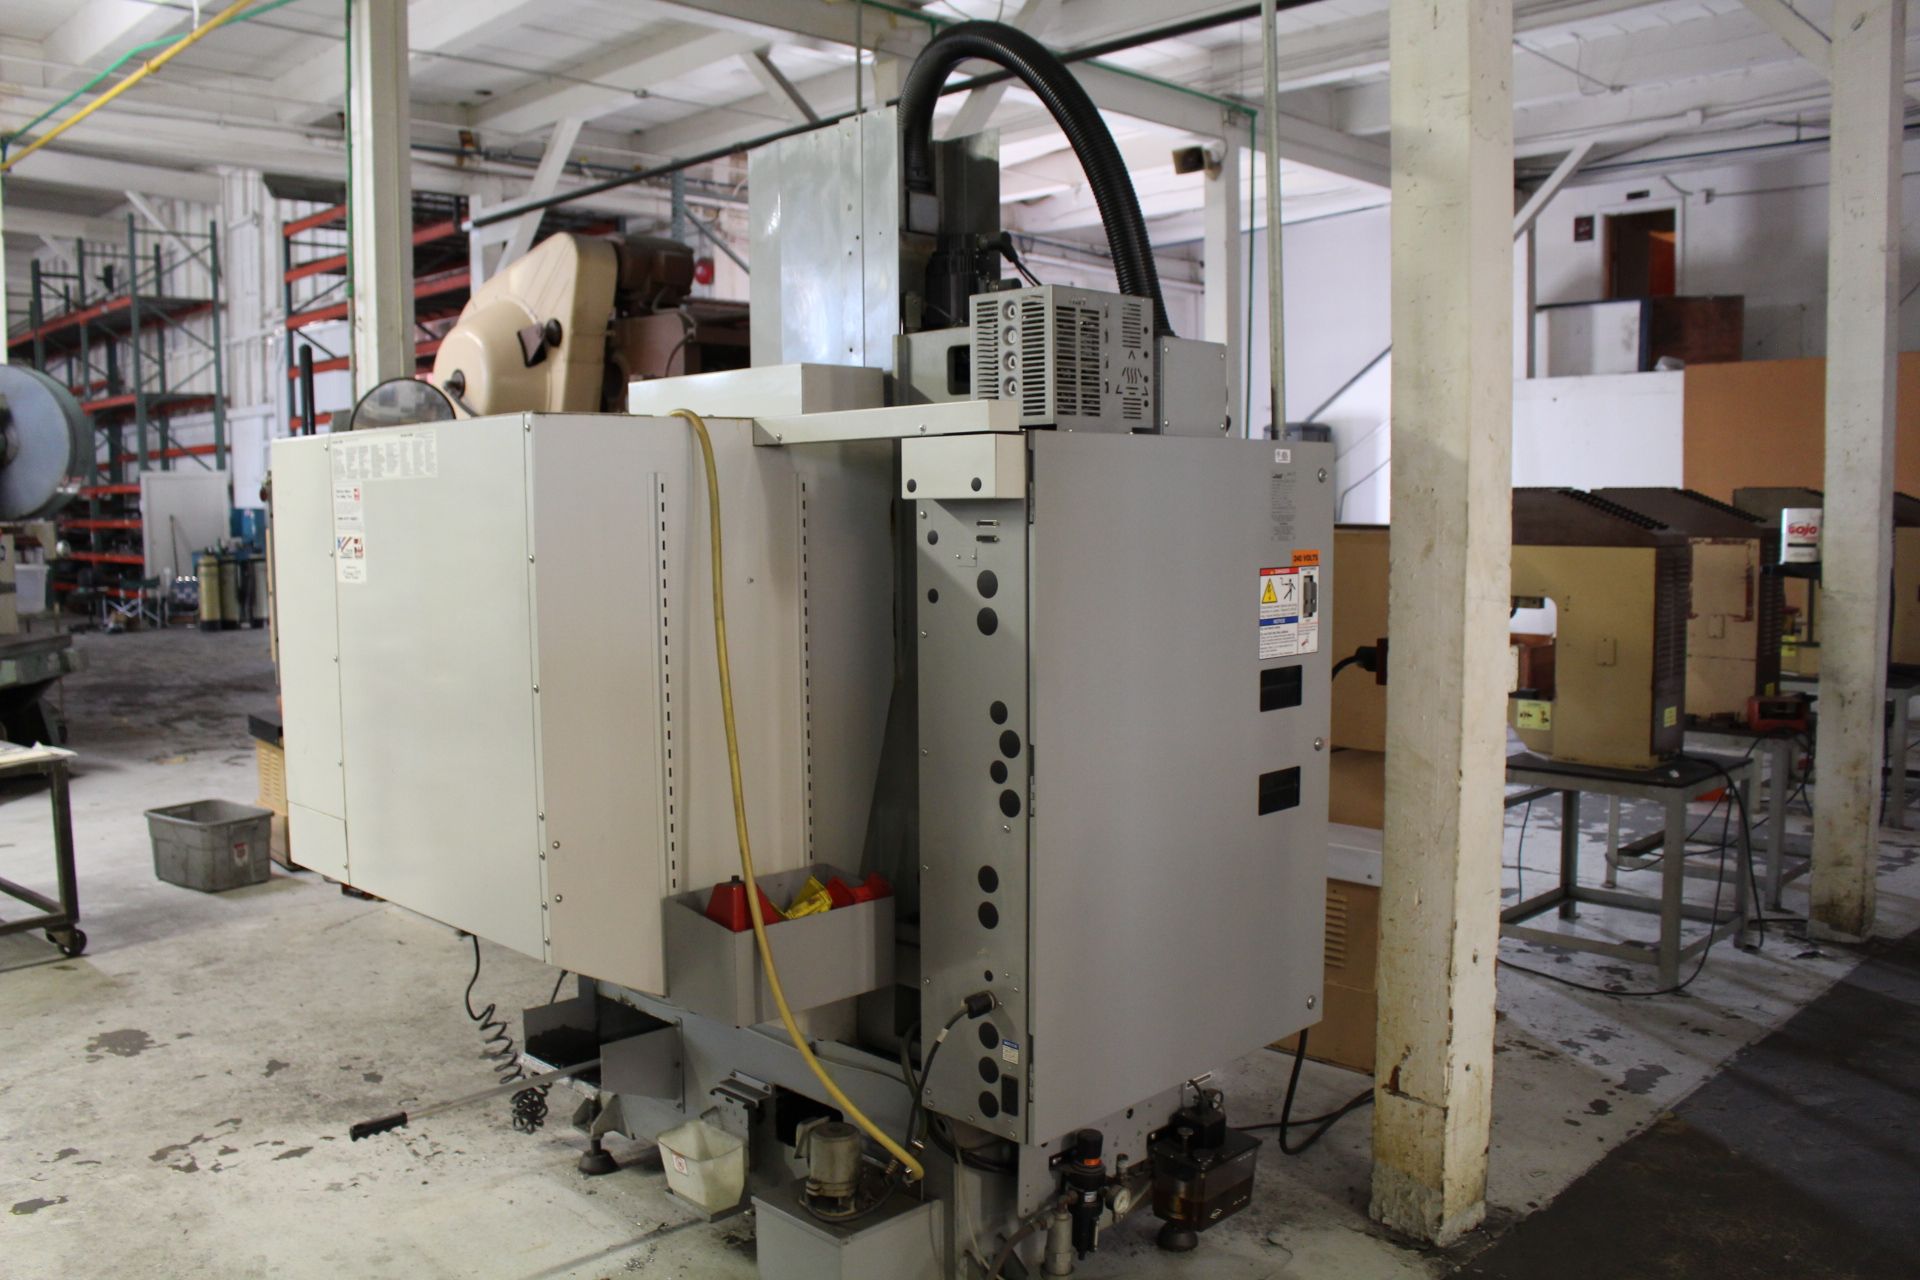 2009 HAAS SUPERMINI MILL 2 CNC VERTICAL MILL, S/N 1073933, 20" X, 16" Y, 14" Z, 40" X 14" TABLE, - Image 4 of 7